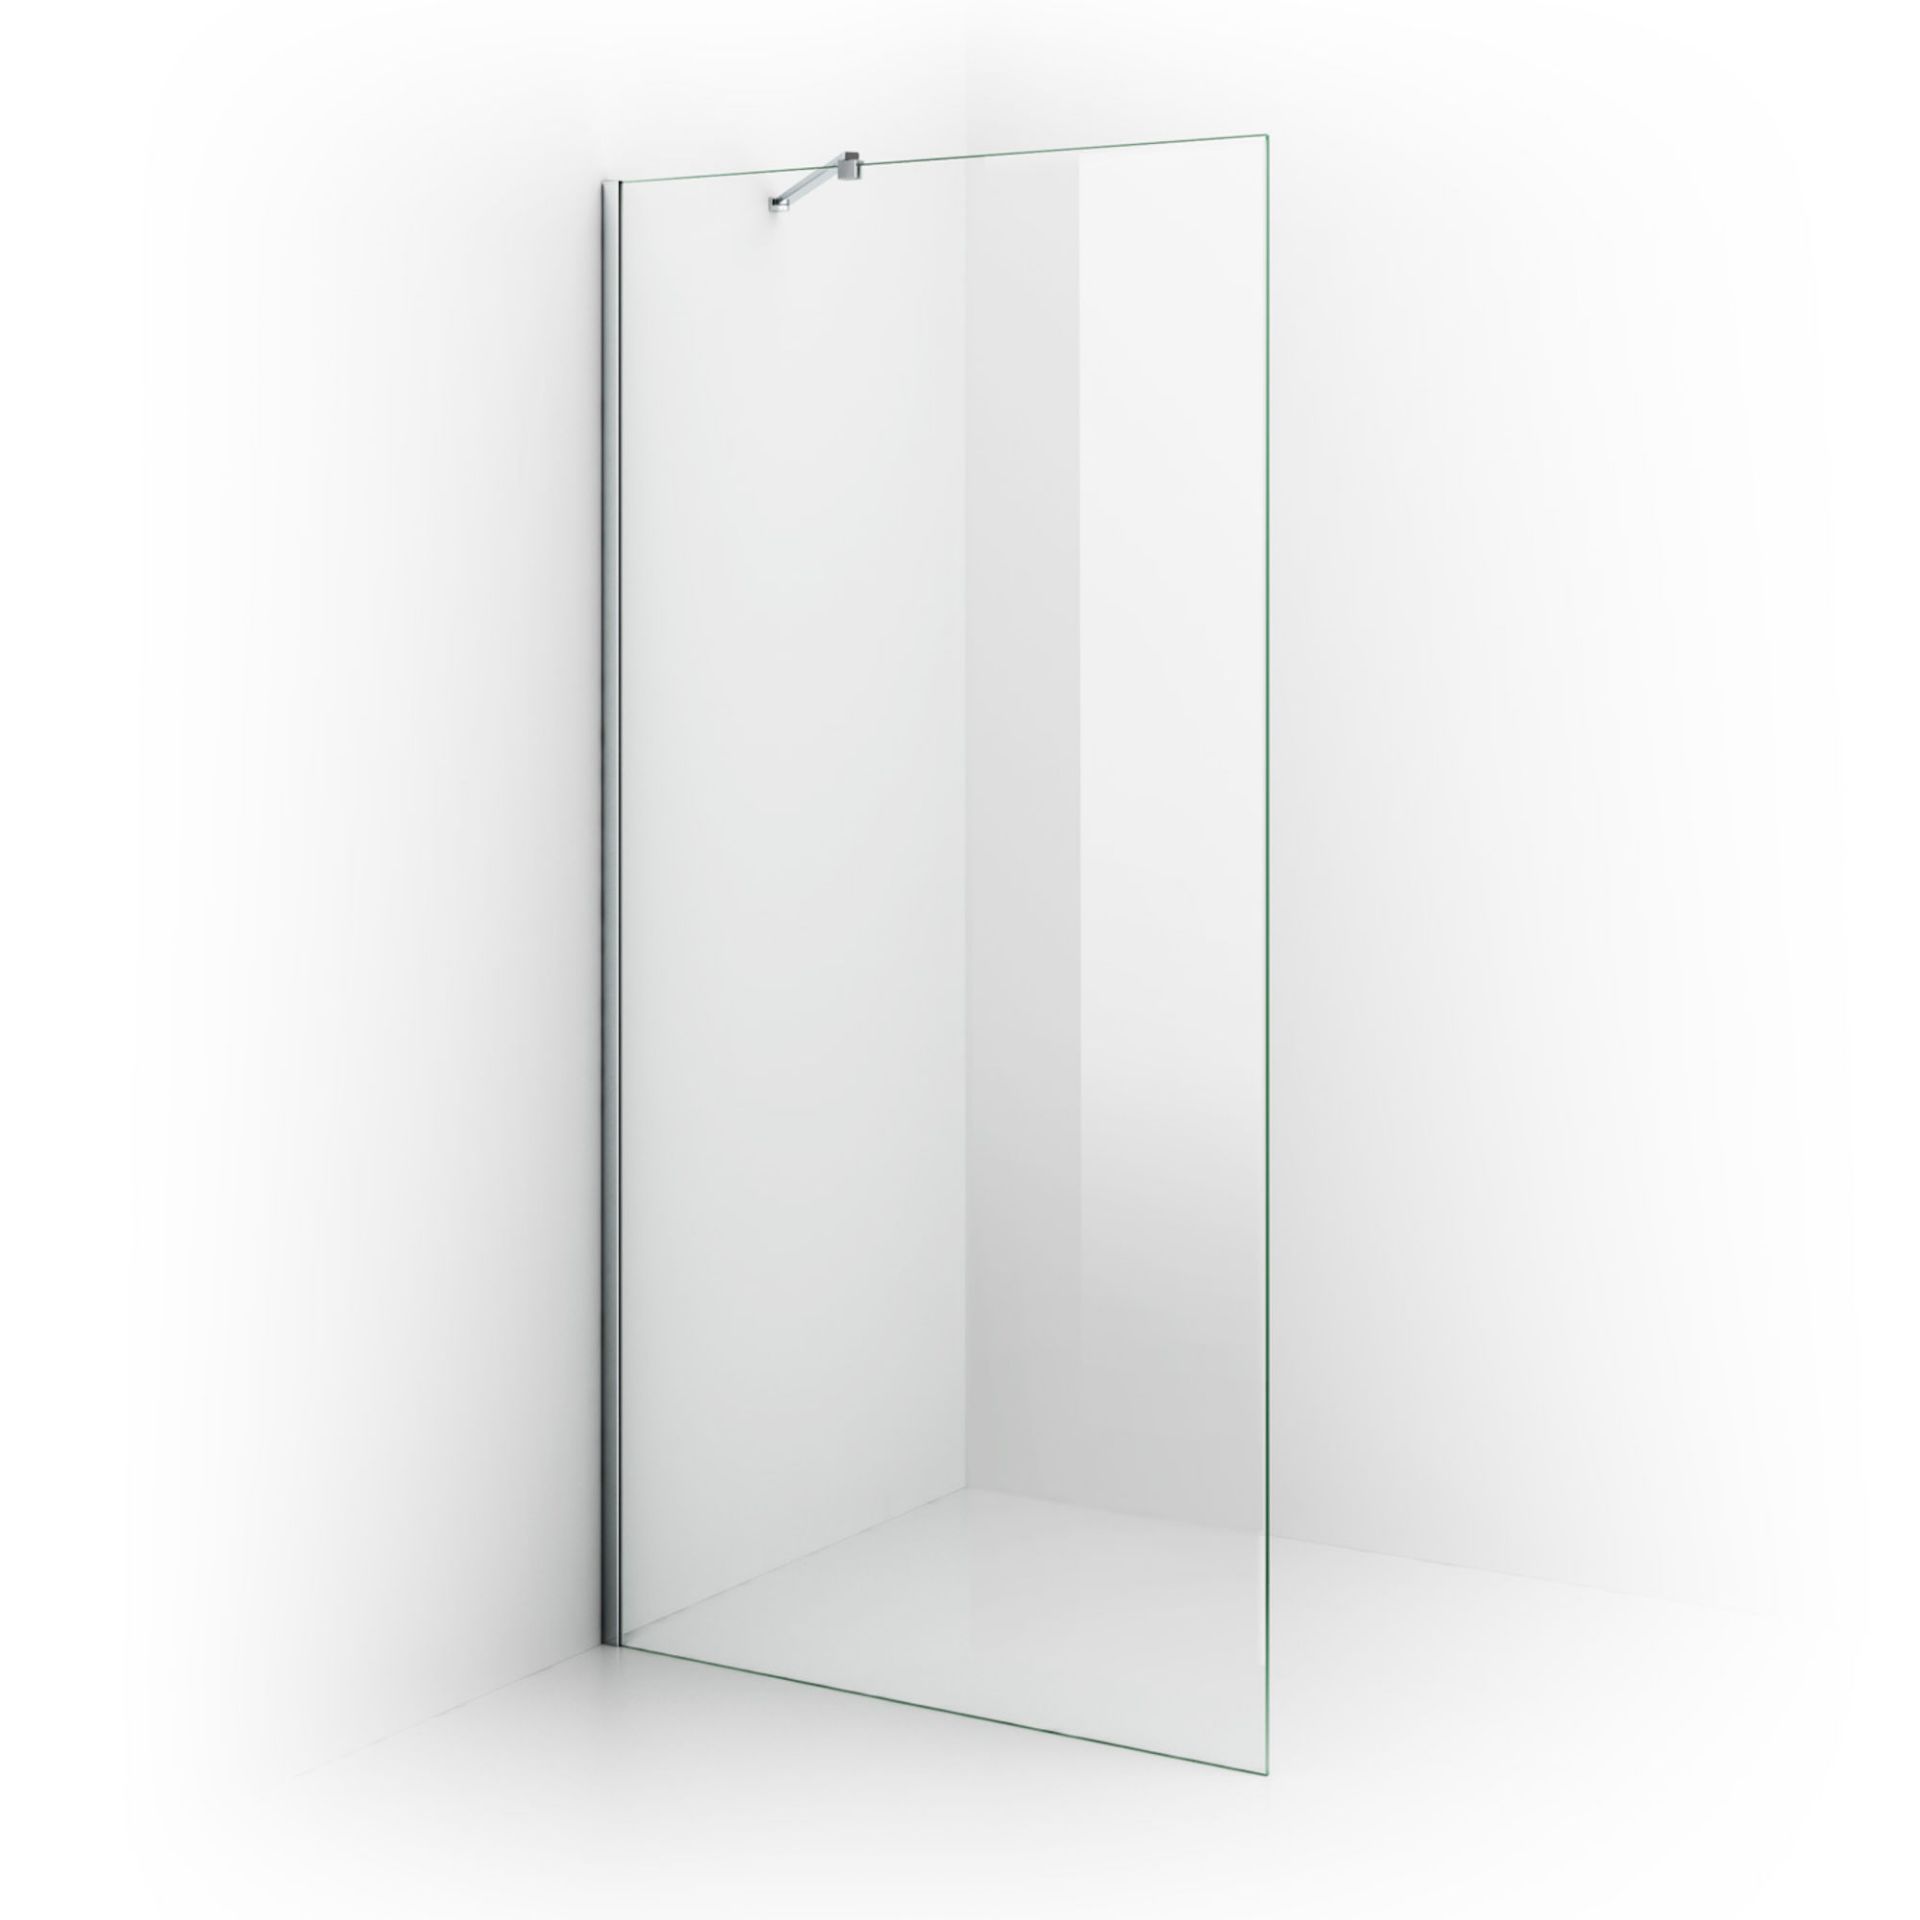 (SA20) 700mm - 8mm - Premium EasyClean Wetroom Panel. RRP £299.99. 8mm EasyClean glass - Our glass - Image 3 of 4